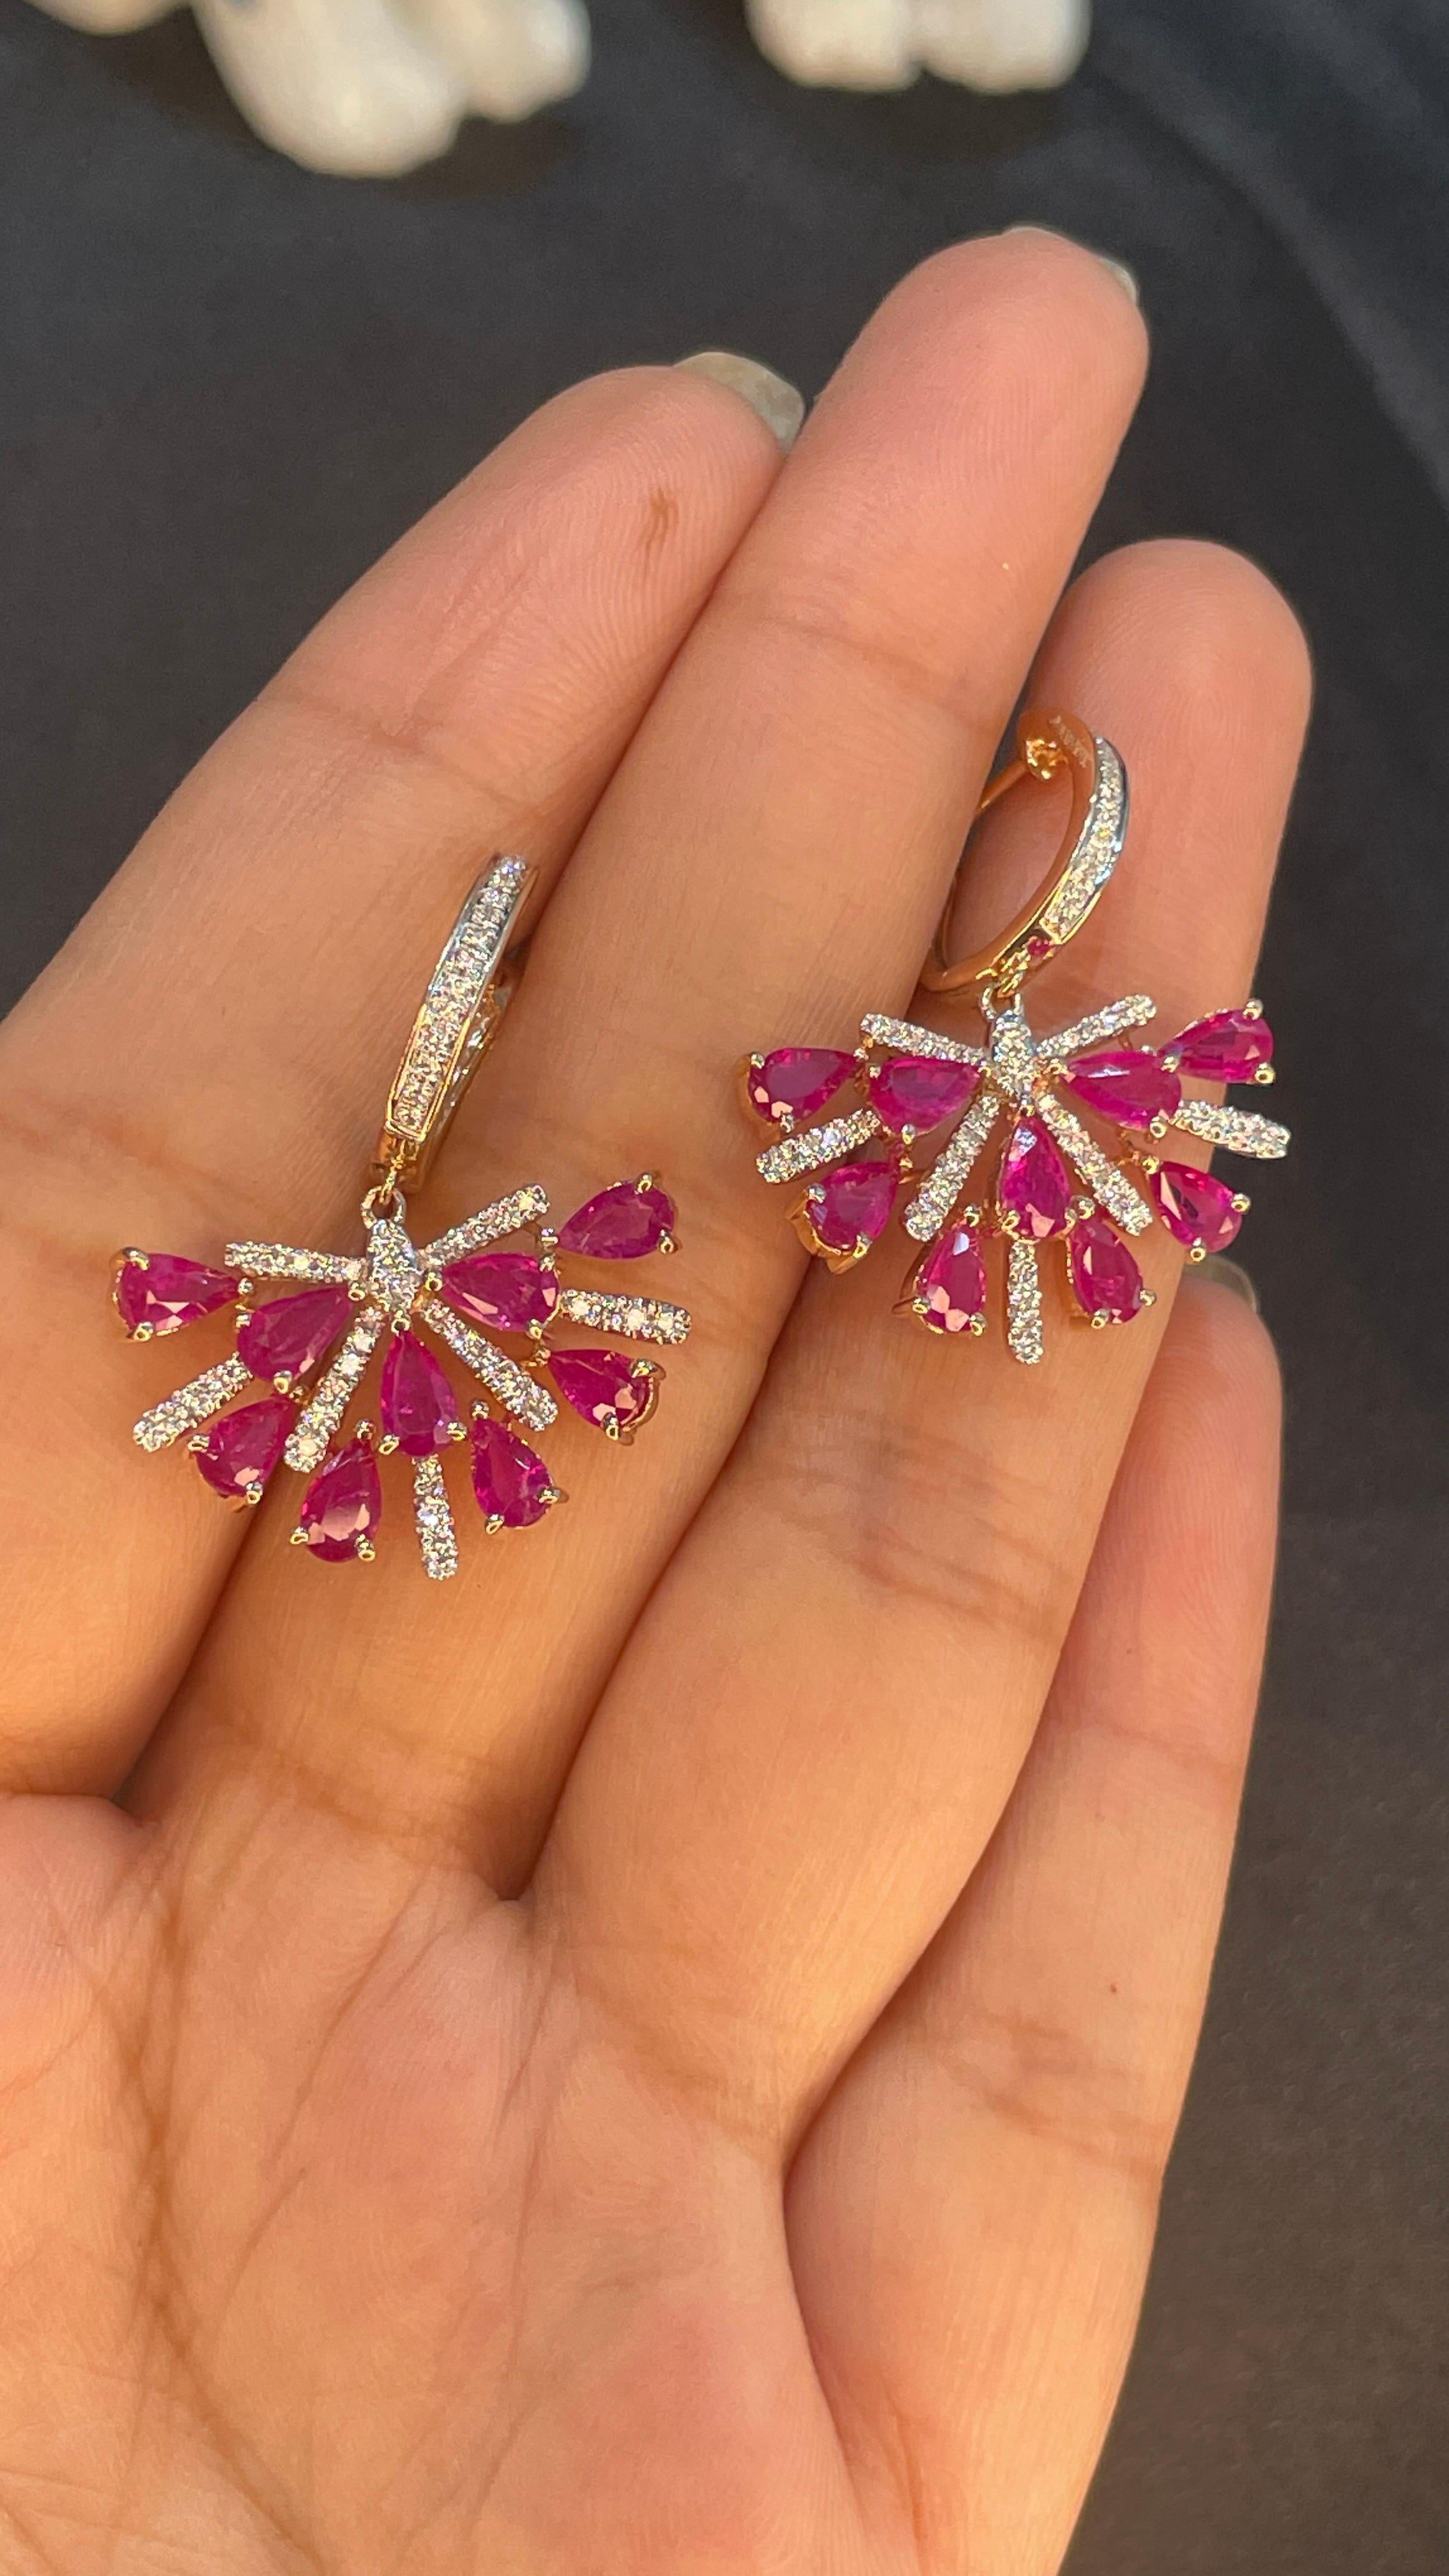 Ruby Drop earrings to make a statement with your look. These earrings create a sparkling, luxurious look featuring pear cut gemstone.
If you love to gravitate towards unique styles, this piece of jewelry is perfect for you.

PRODUCT DETAILS :-

>